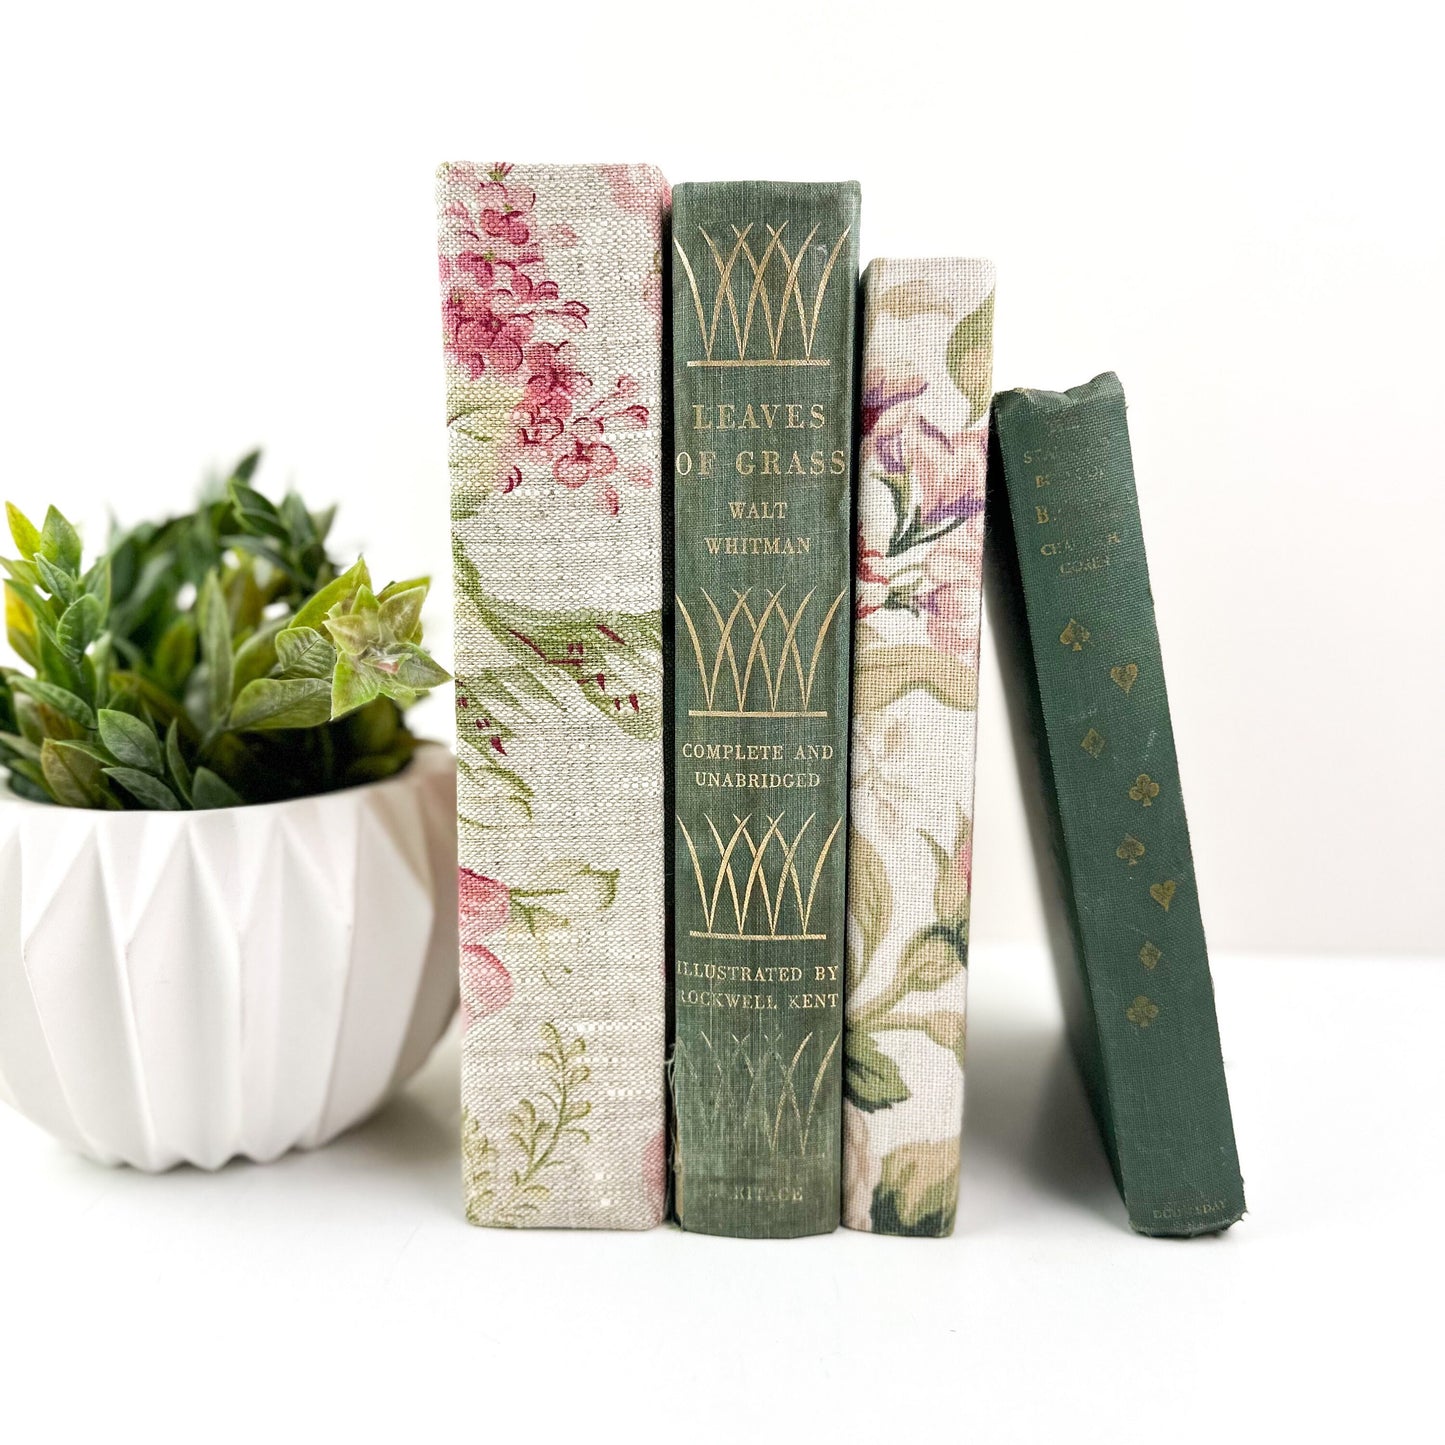 Spring Decorative Books for Home Decor, Books by Color, Books by the Foot, Shelf Decor